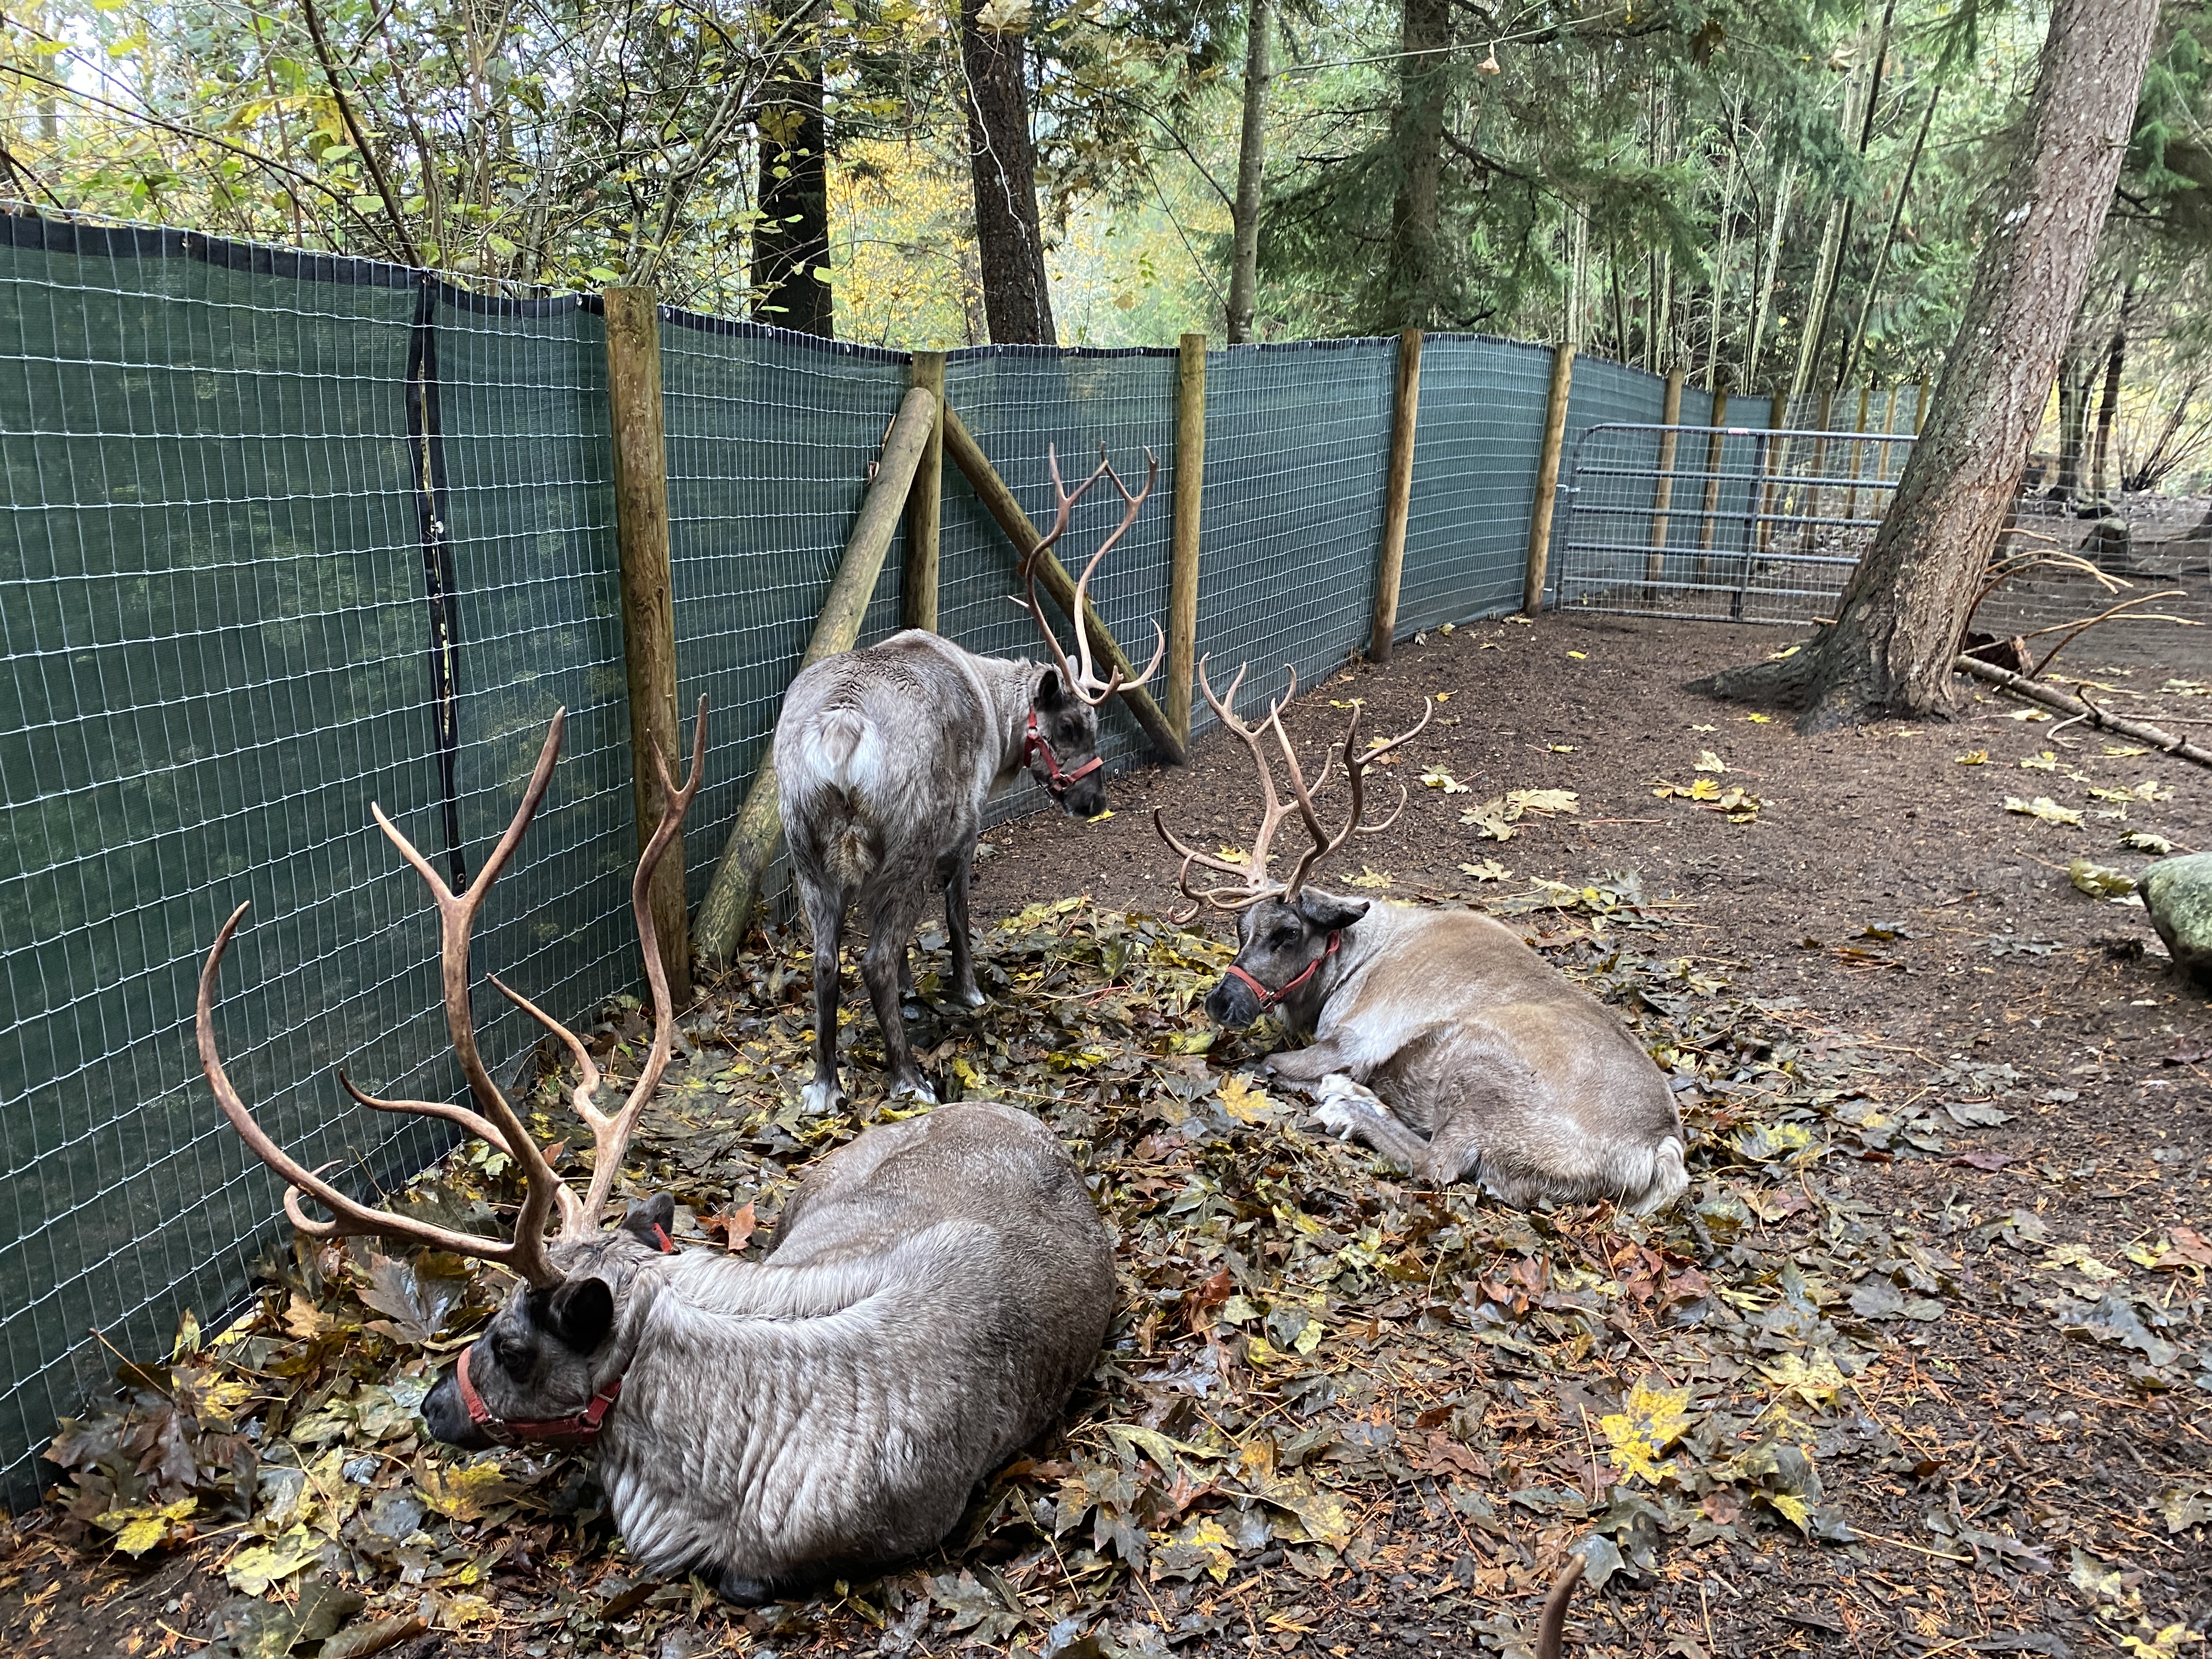 Reindeer in a pen, who may have been used for Christmas events